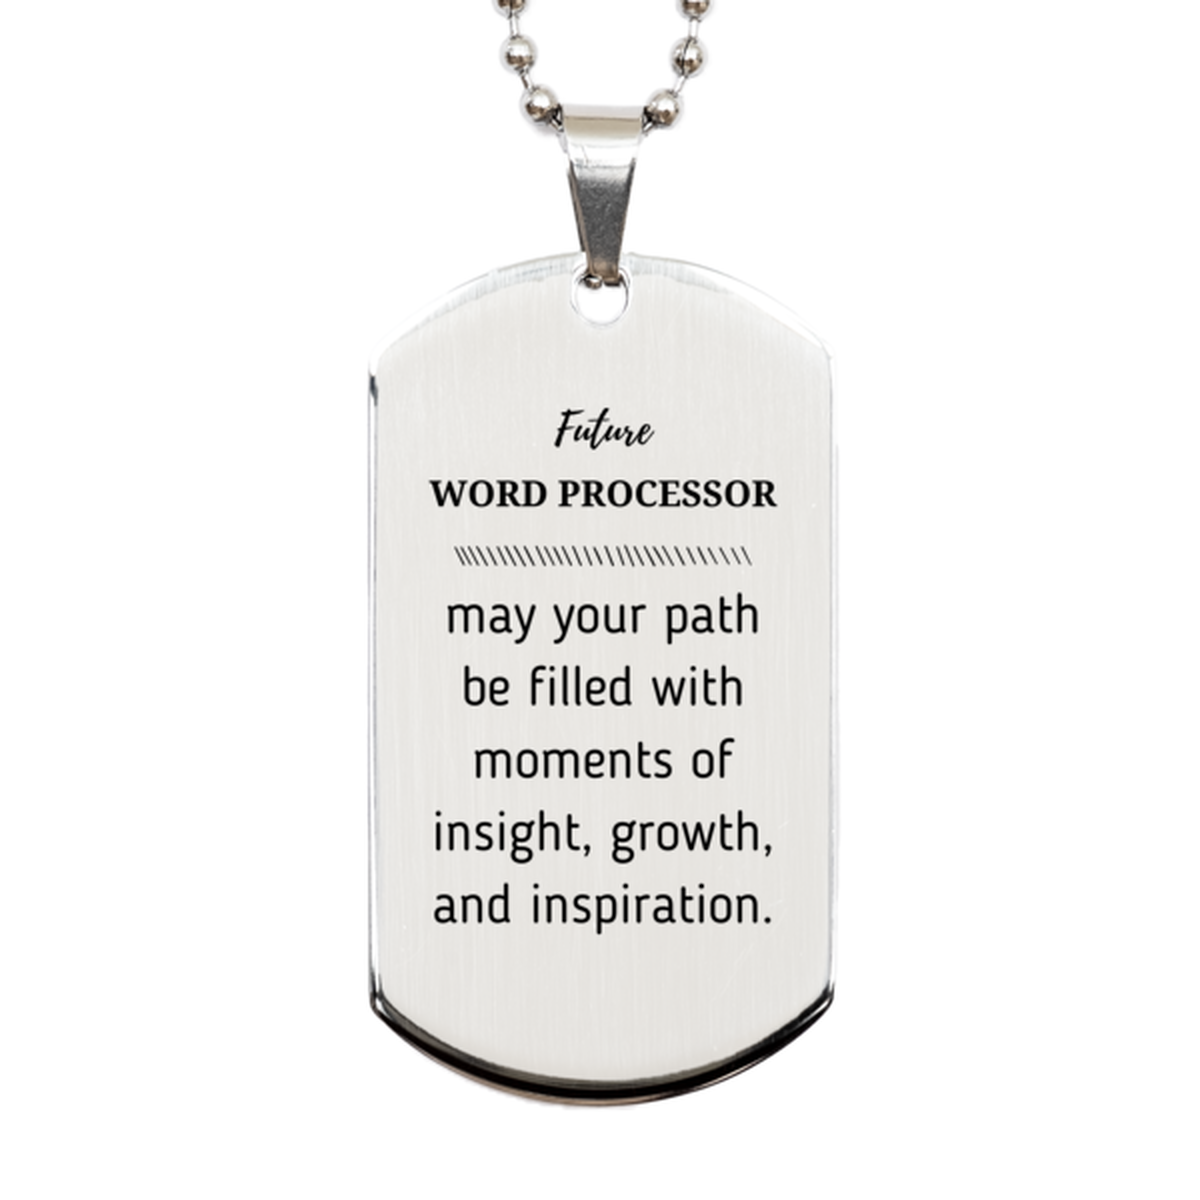 Future Word Processor Gifts, May your path be filled with moments of insight, Graduation Gifts for New Word Processor, Christmas Unique Silver Dog Tag For Men, Women, Friends